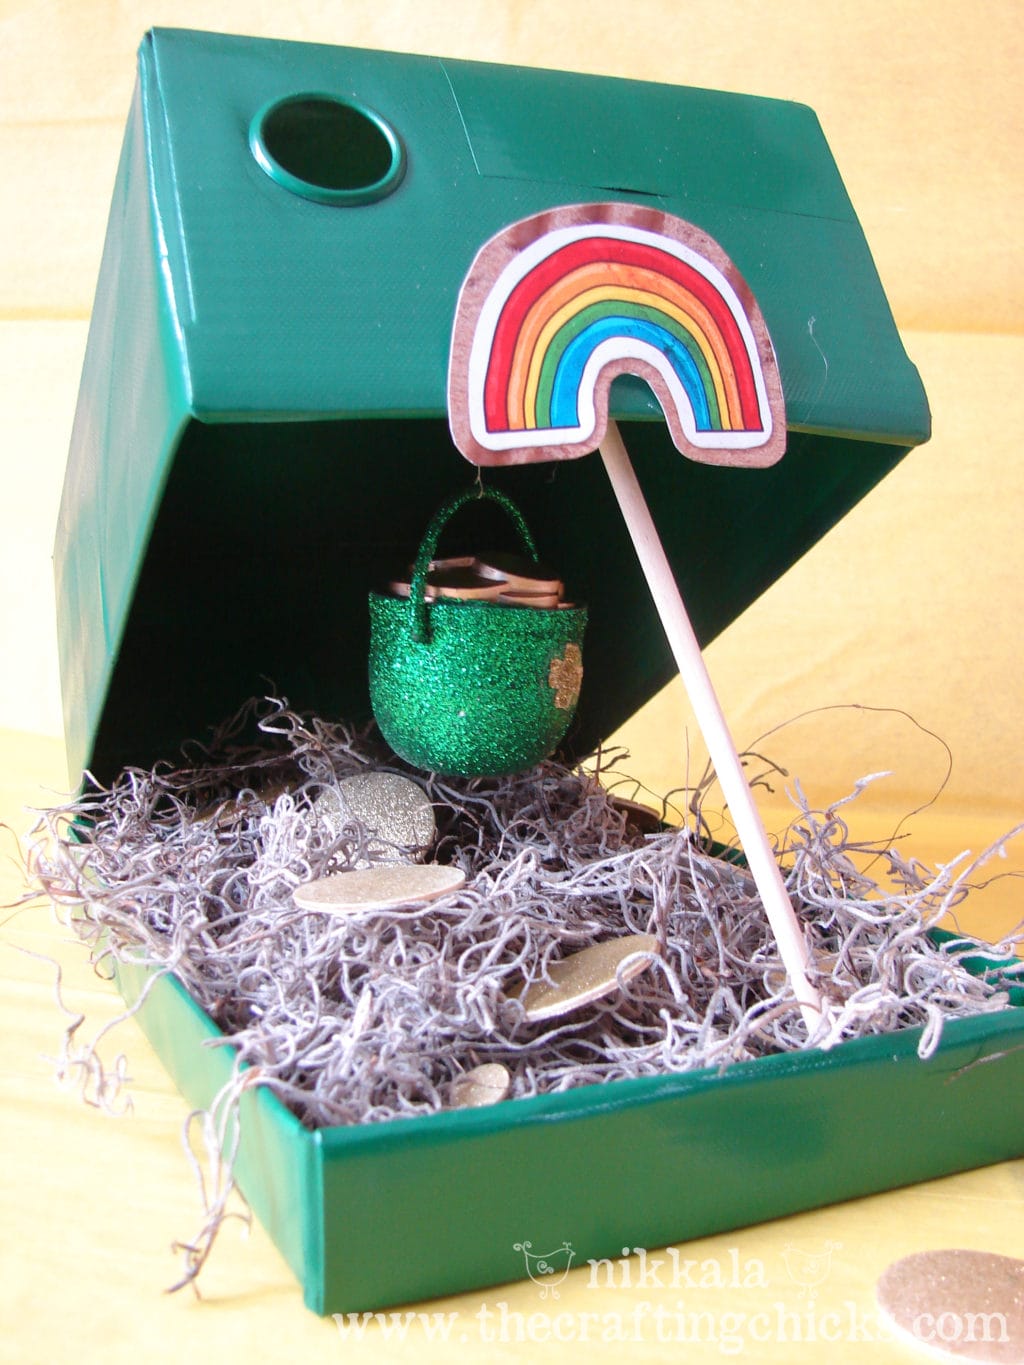 Leprechaun Trap made out of an old shoe box. Painted green with a treasure inside.